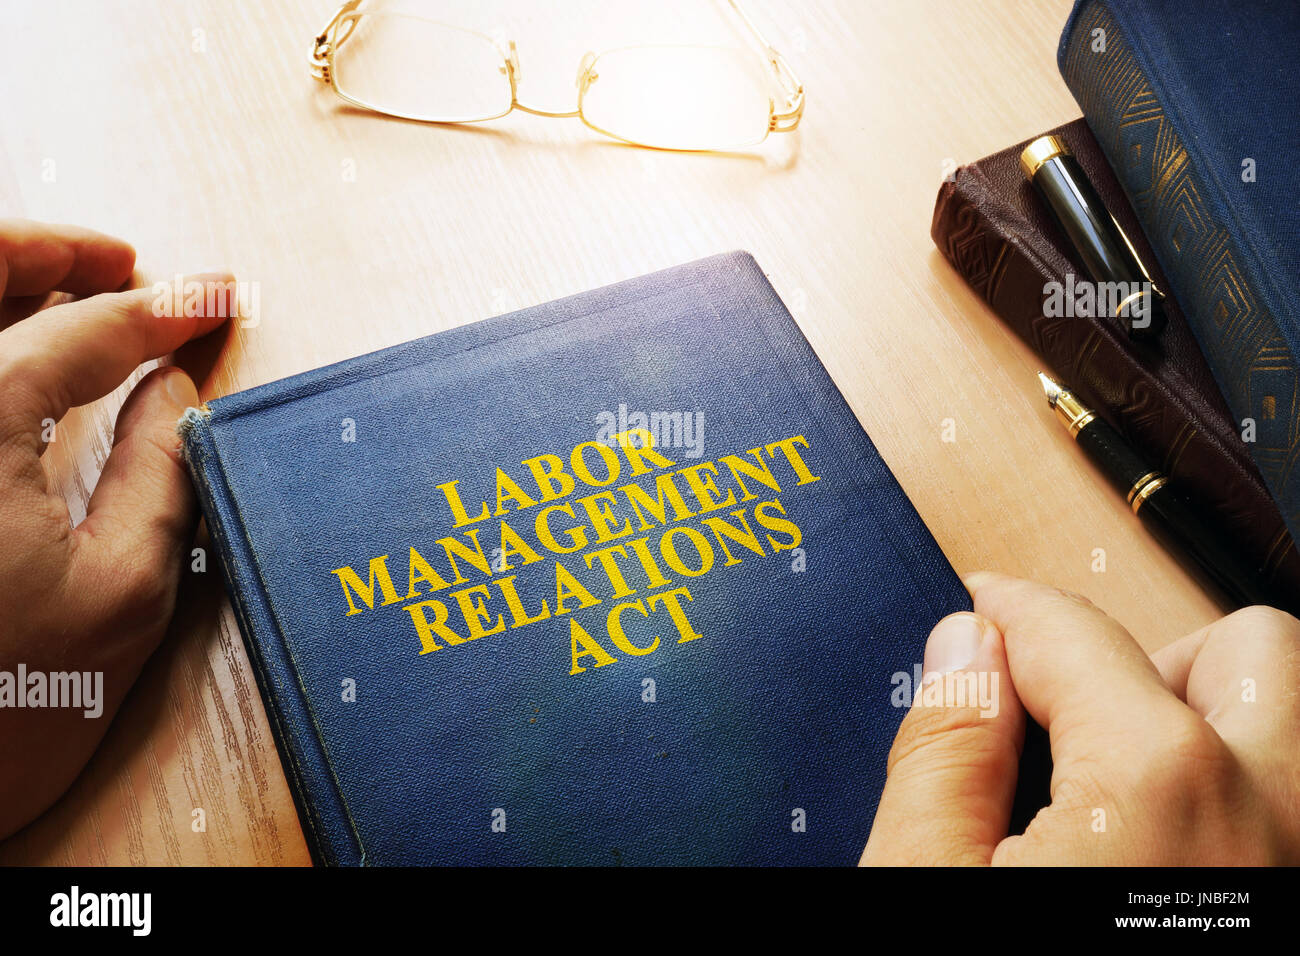 The Labor Management Relations Act (LMRA) concept. Stock Photo